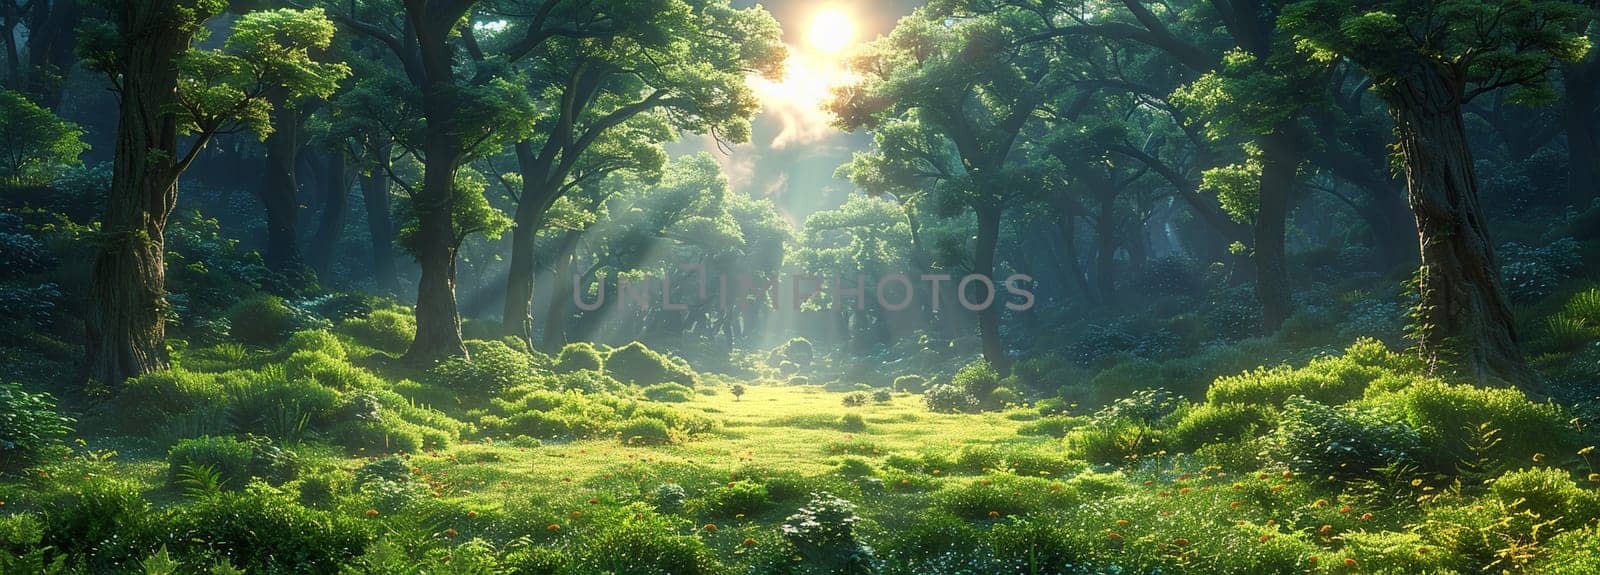 Serene green forest landscape bathed in summer sunlight with vibrant foliage and shadows creating tranquil scenery for graphic design.